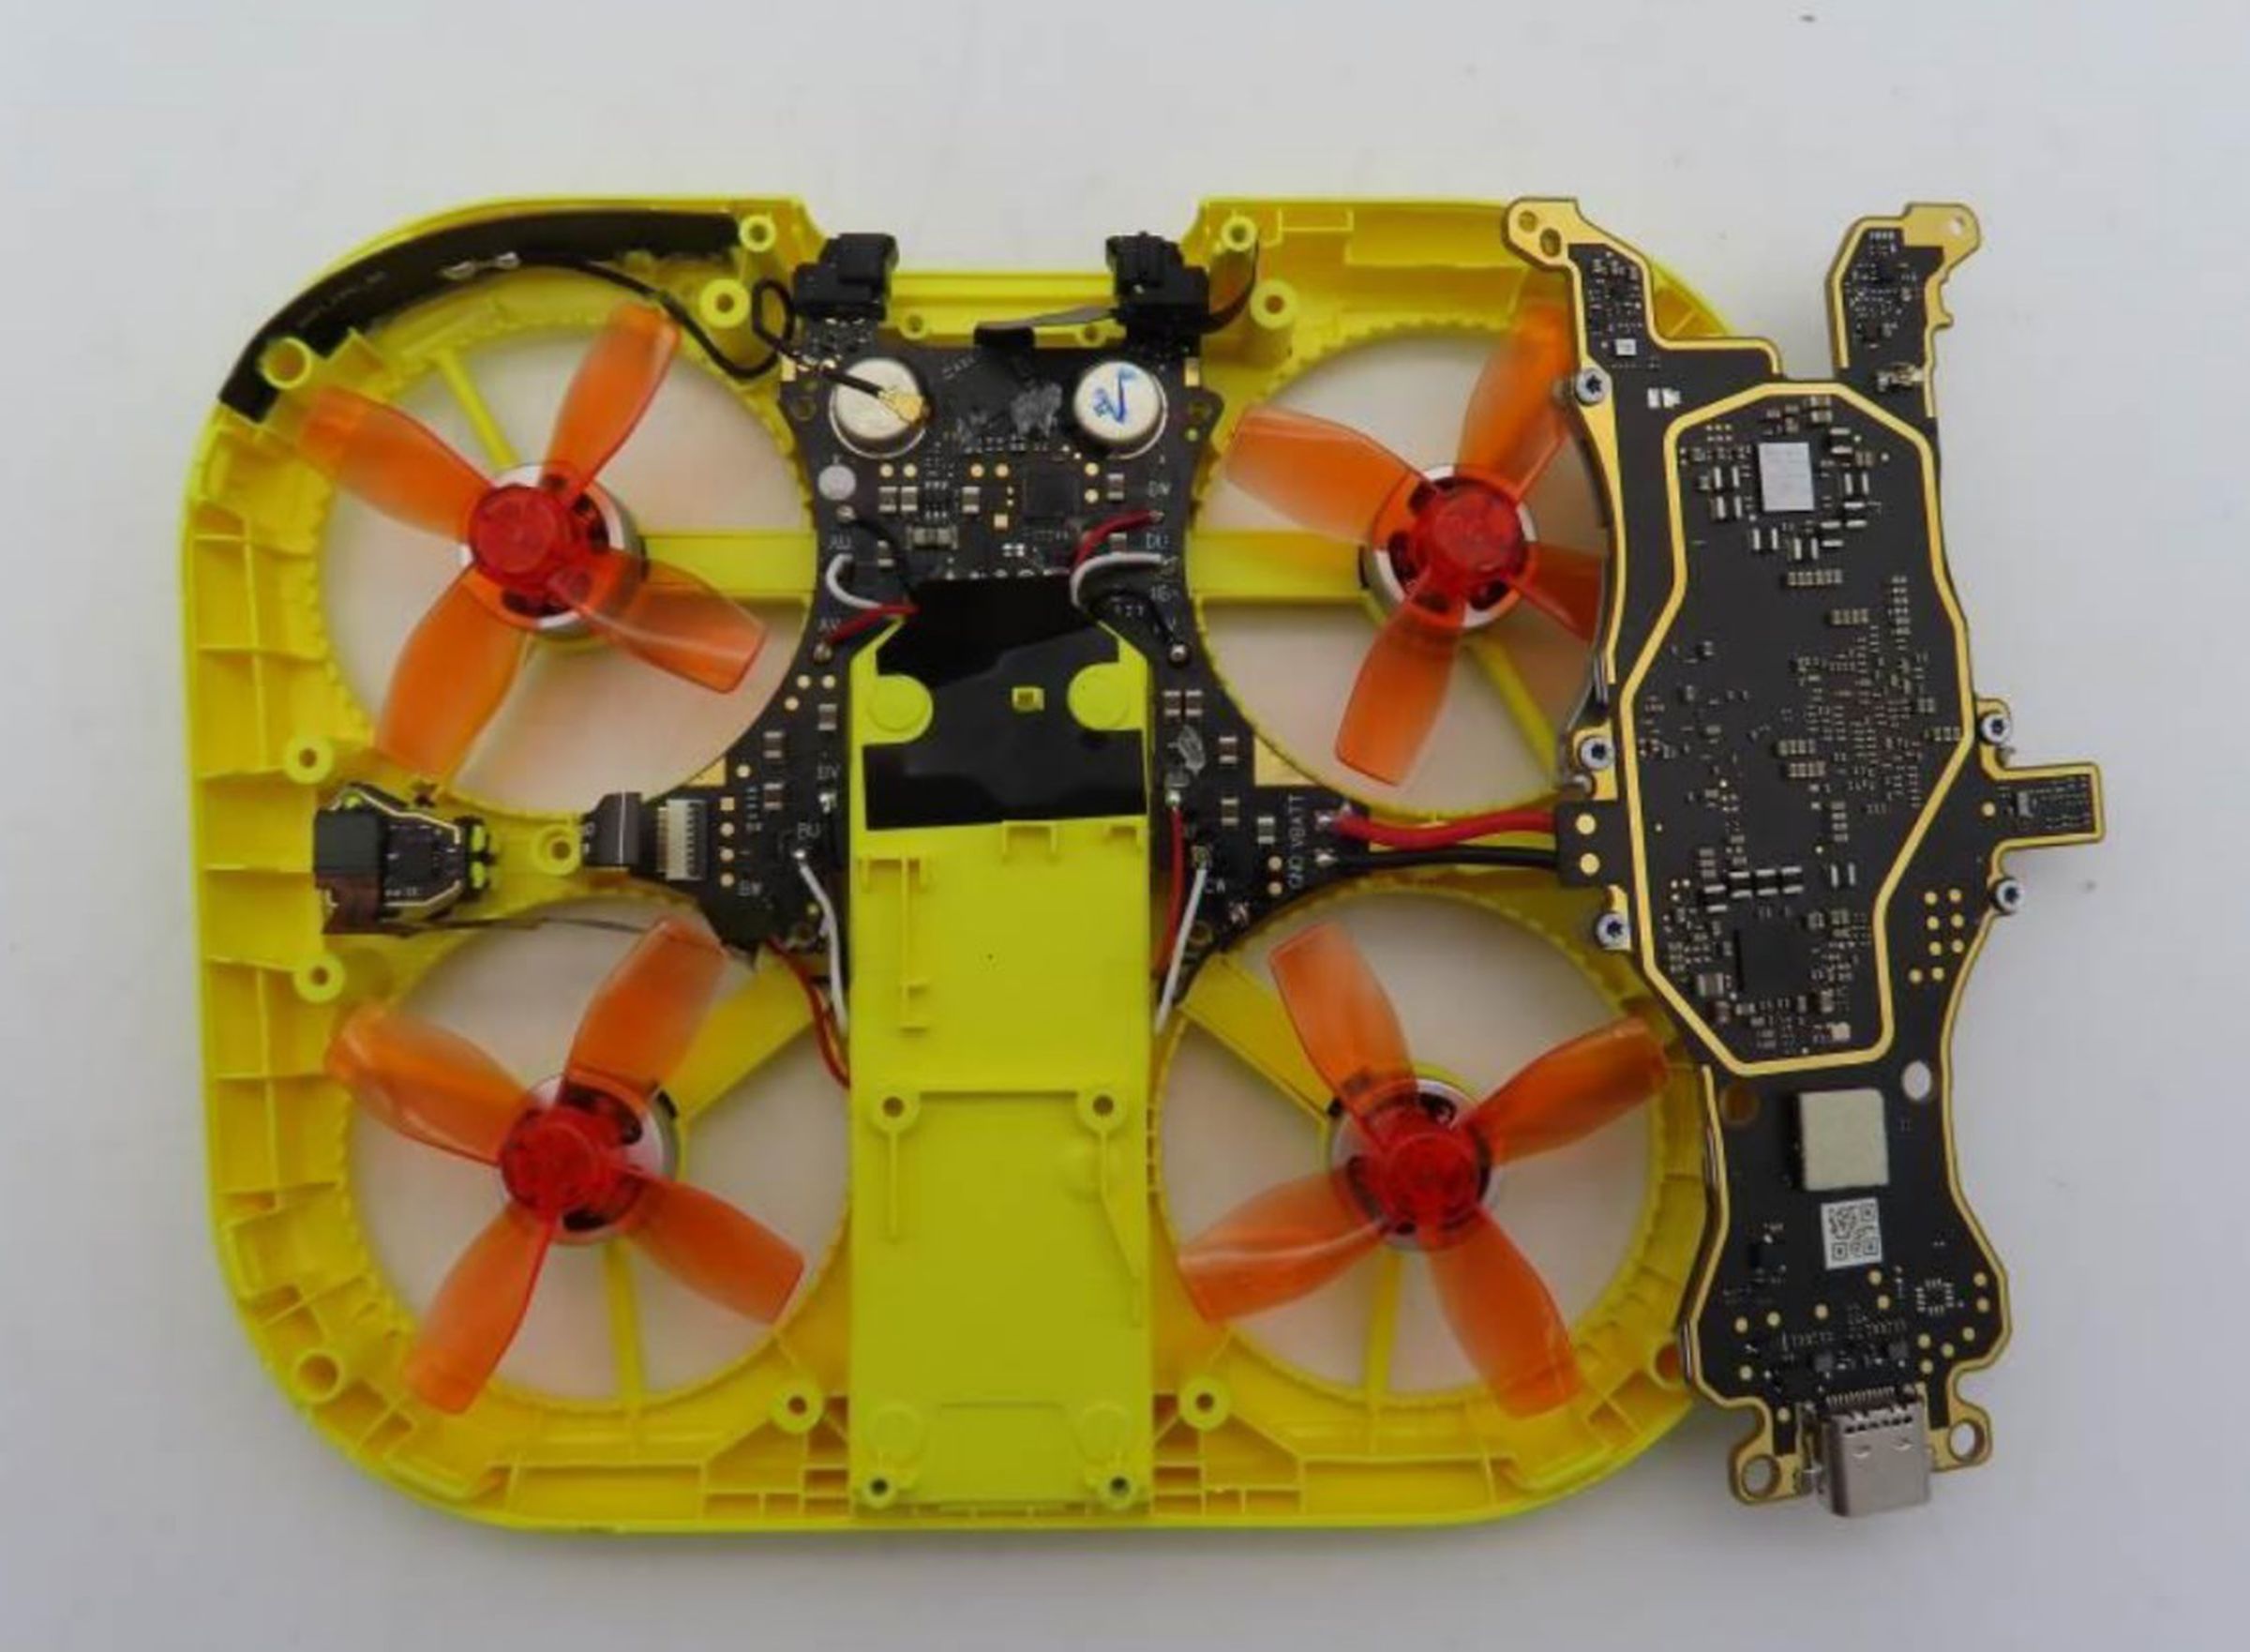 The drone has two circuit boards inside.